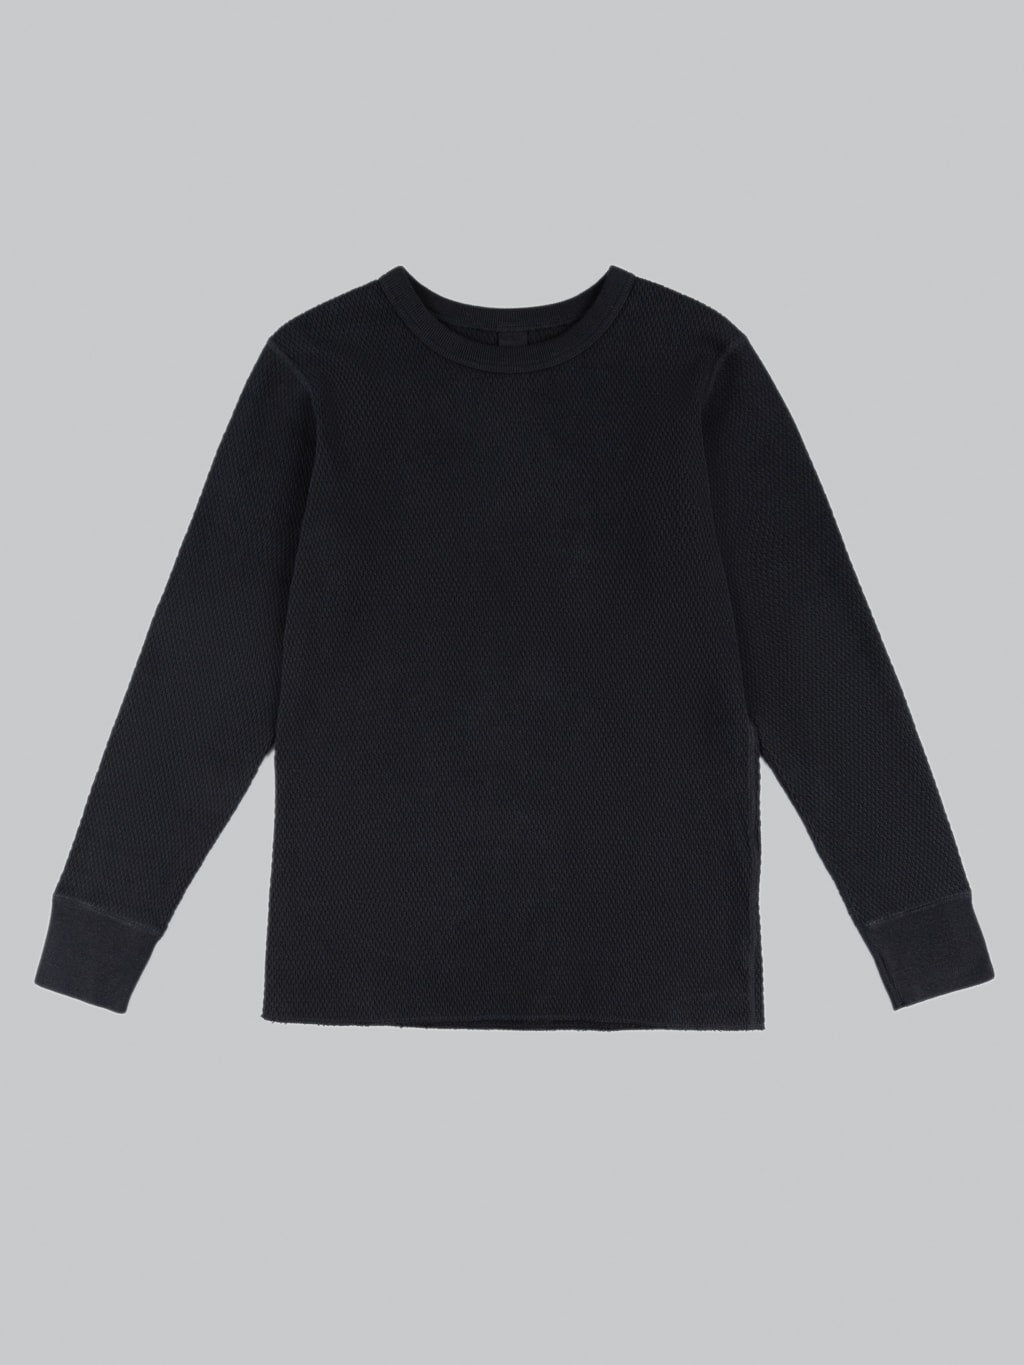 UES Double Honeycomb Thermal TShirt Black front